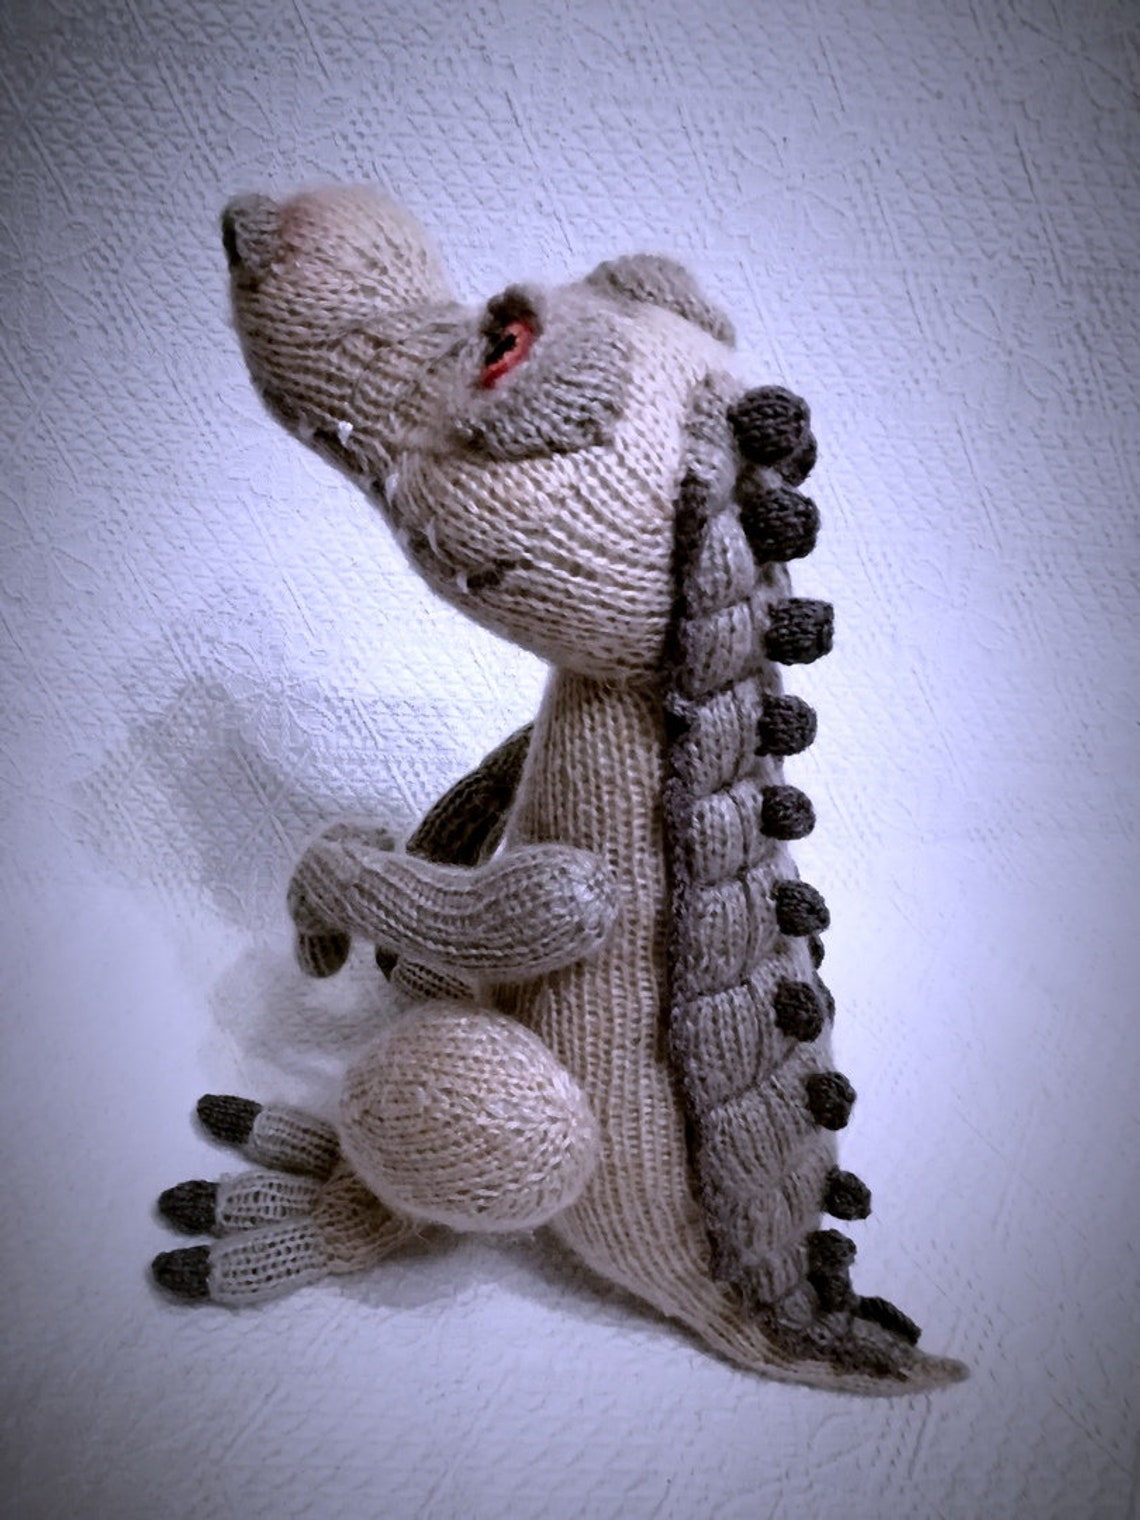 Knit a Rudy The Baryonyx Dinosaur From Ice Age